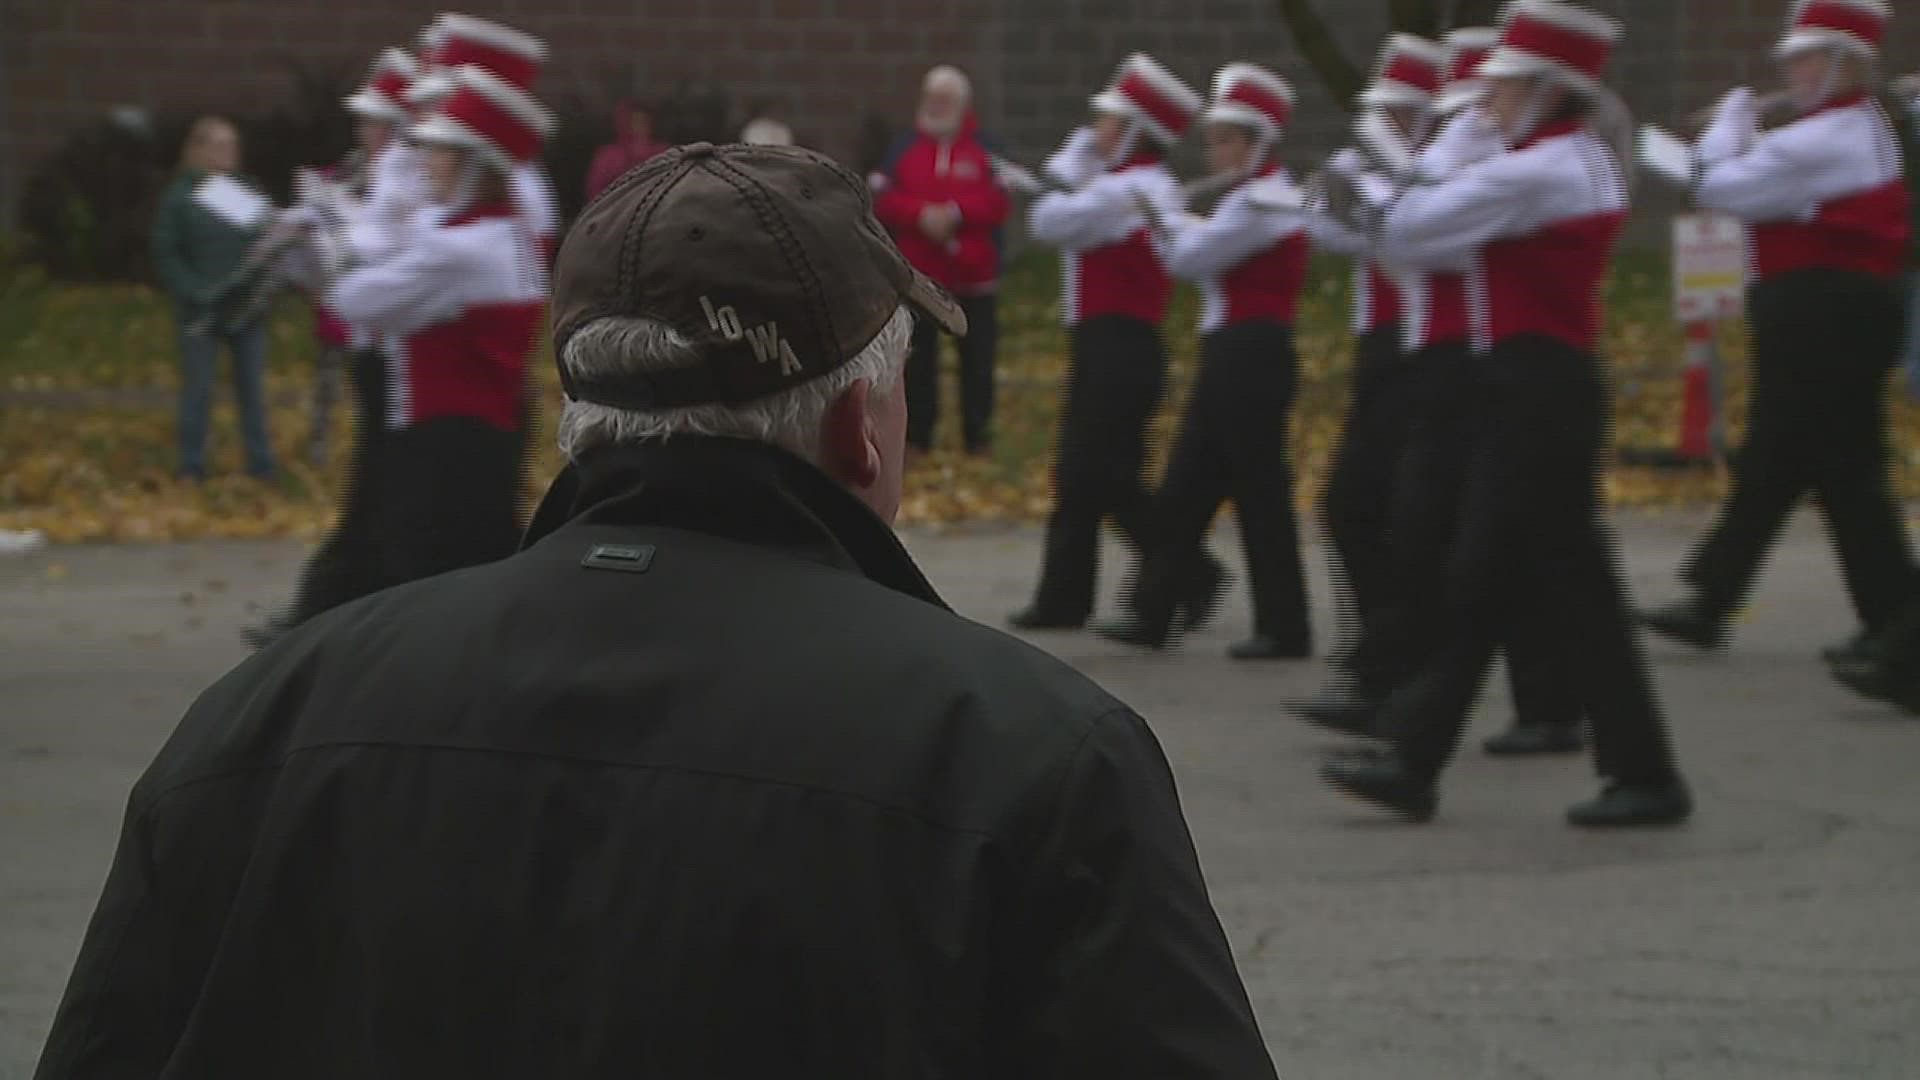 Despite the morning's rain and wind, a bundled up crowd came out to cheer on local veterans, marching bands and more.